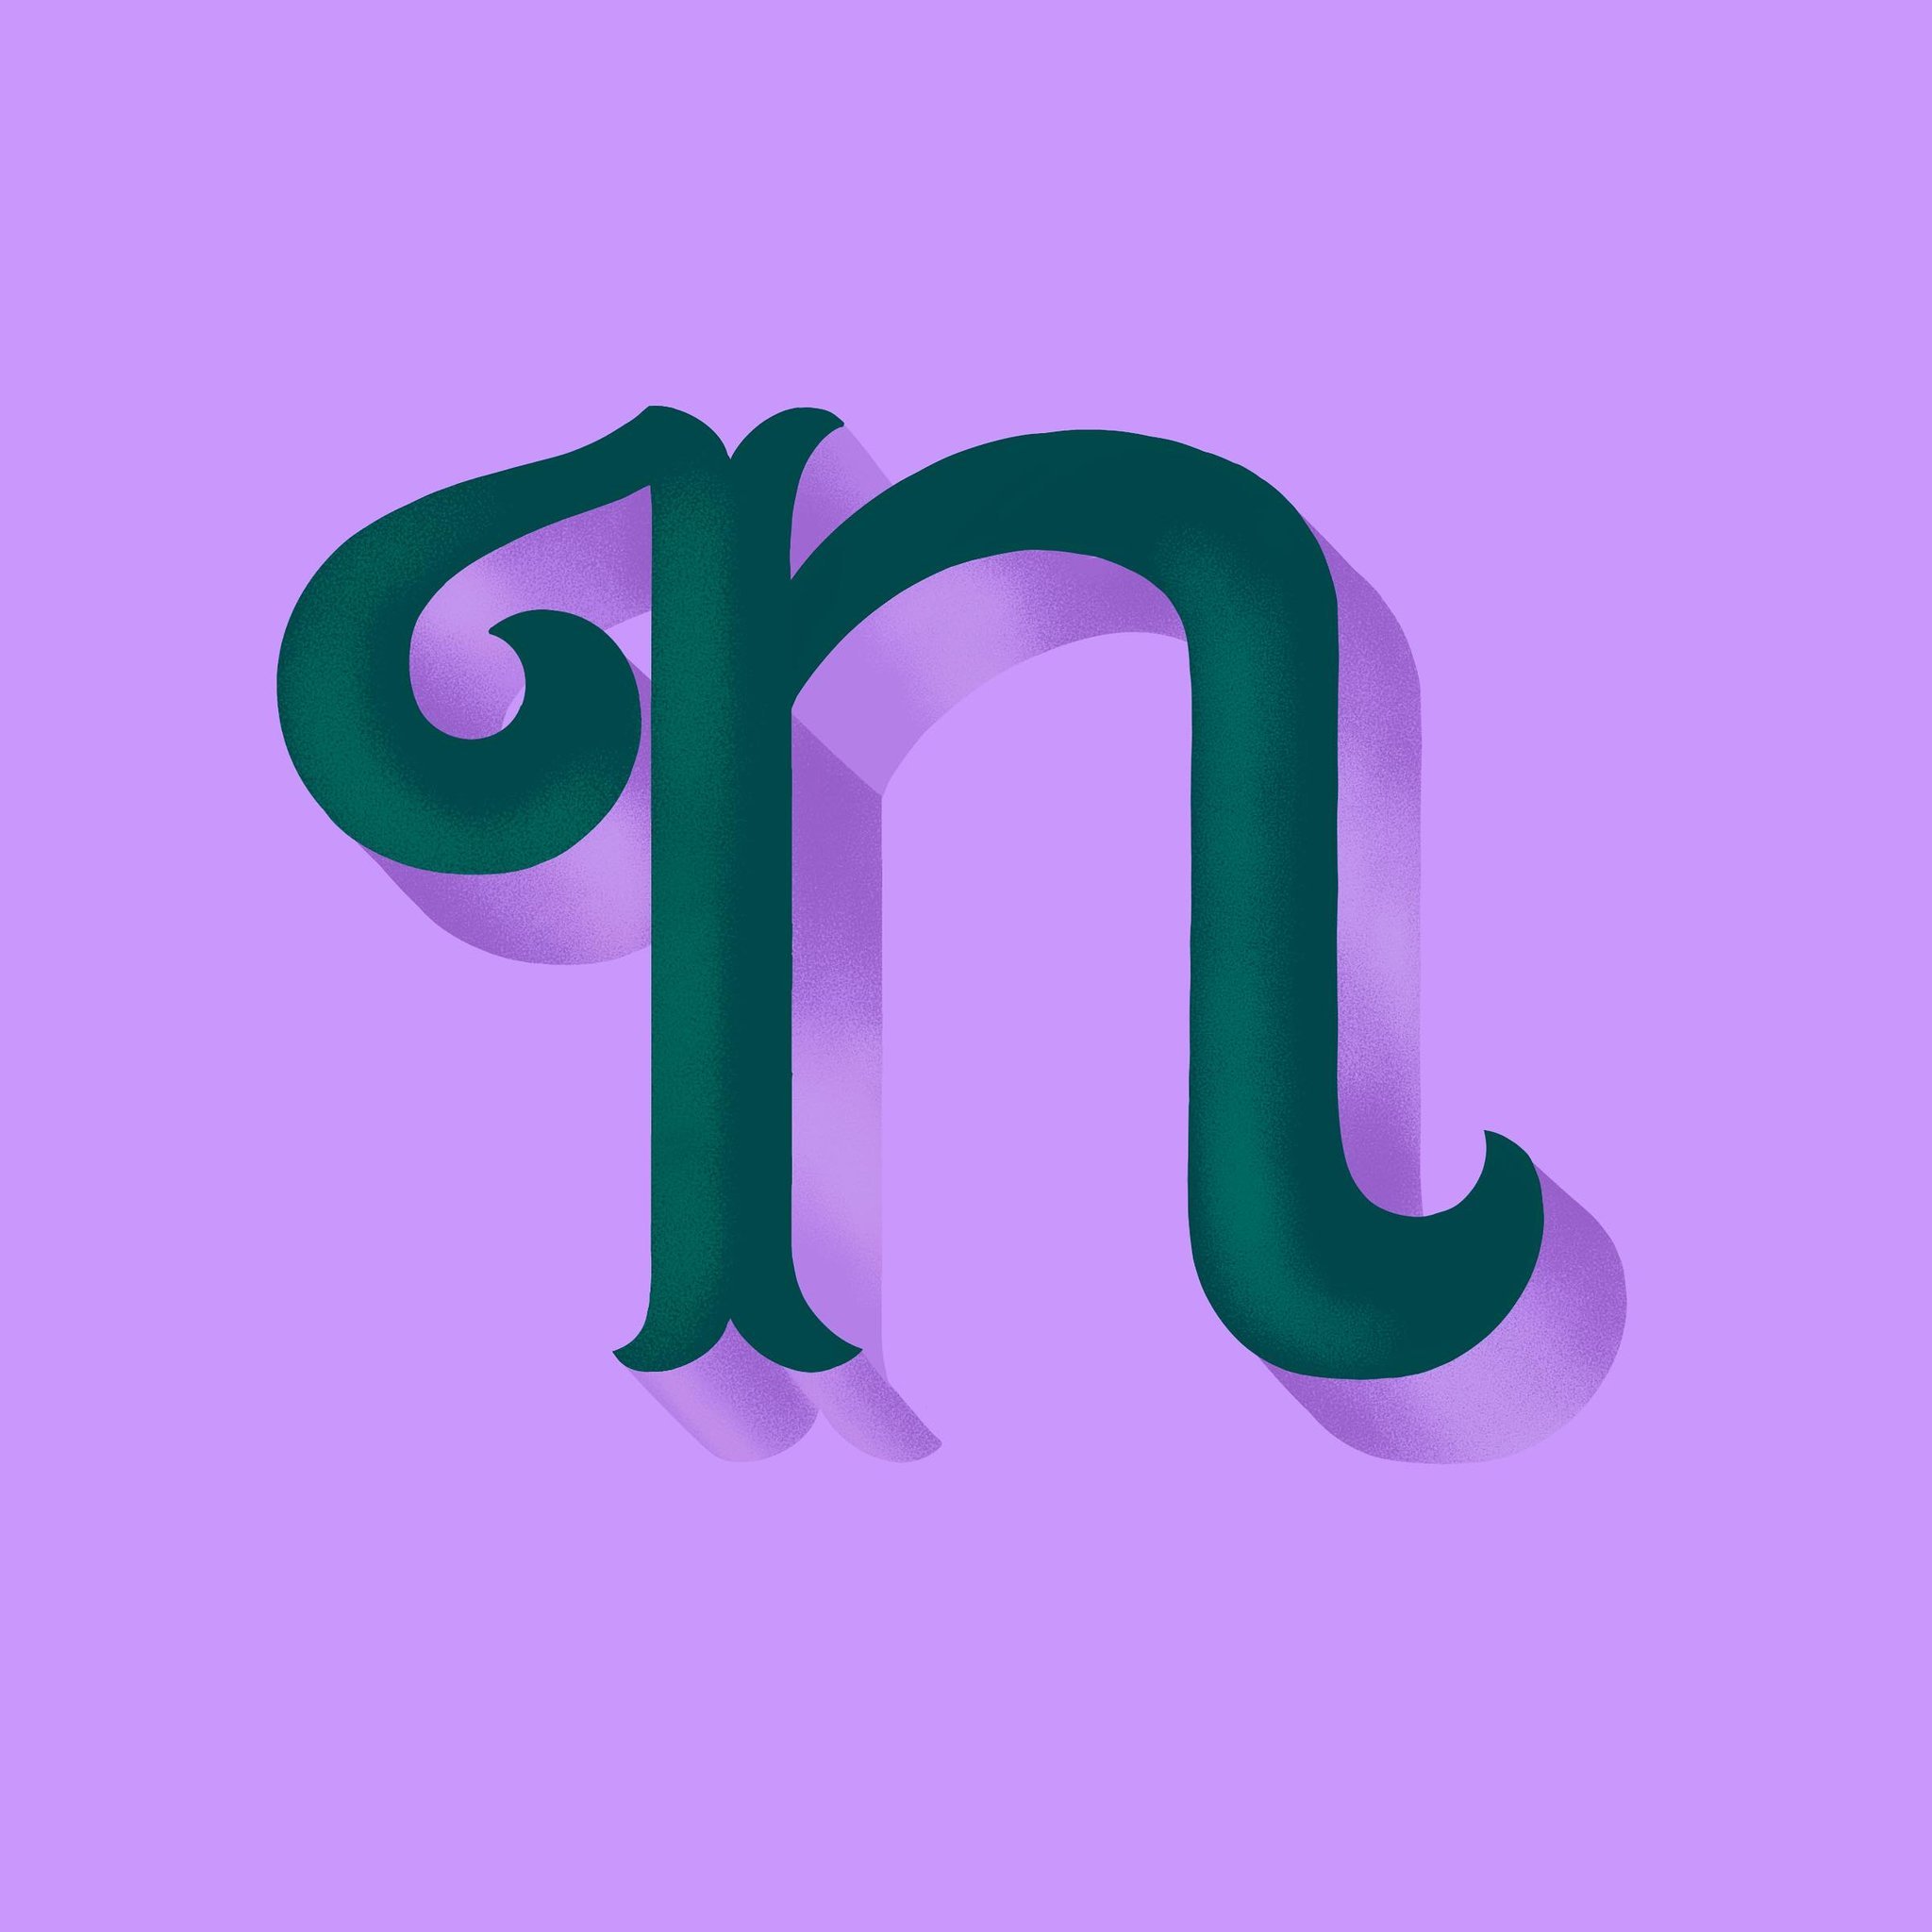 14/36 - N 🔮

For this year&rsquo;s #36daysoftype challenge, I wanted to create a cohesive series of letters and numbers that had bold exaggerated flourishes with a delicious pastel vibe! 

Tools used: 
iPad Pro + Apple pencil 
Procreate app
Retro sh